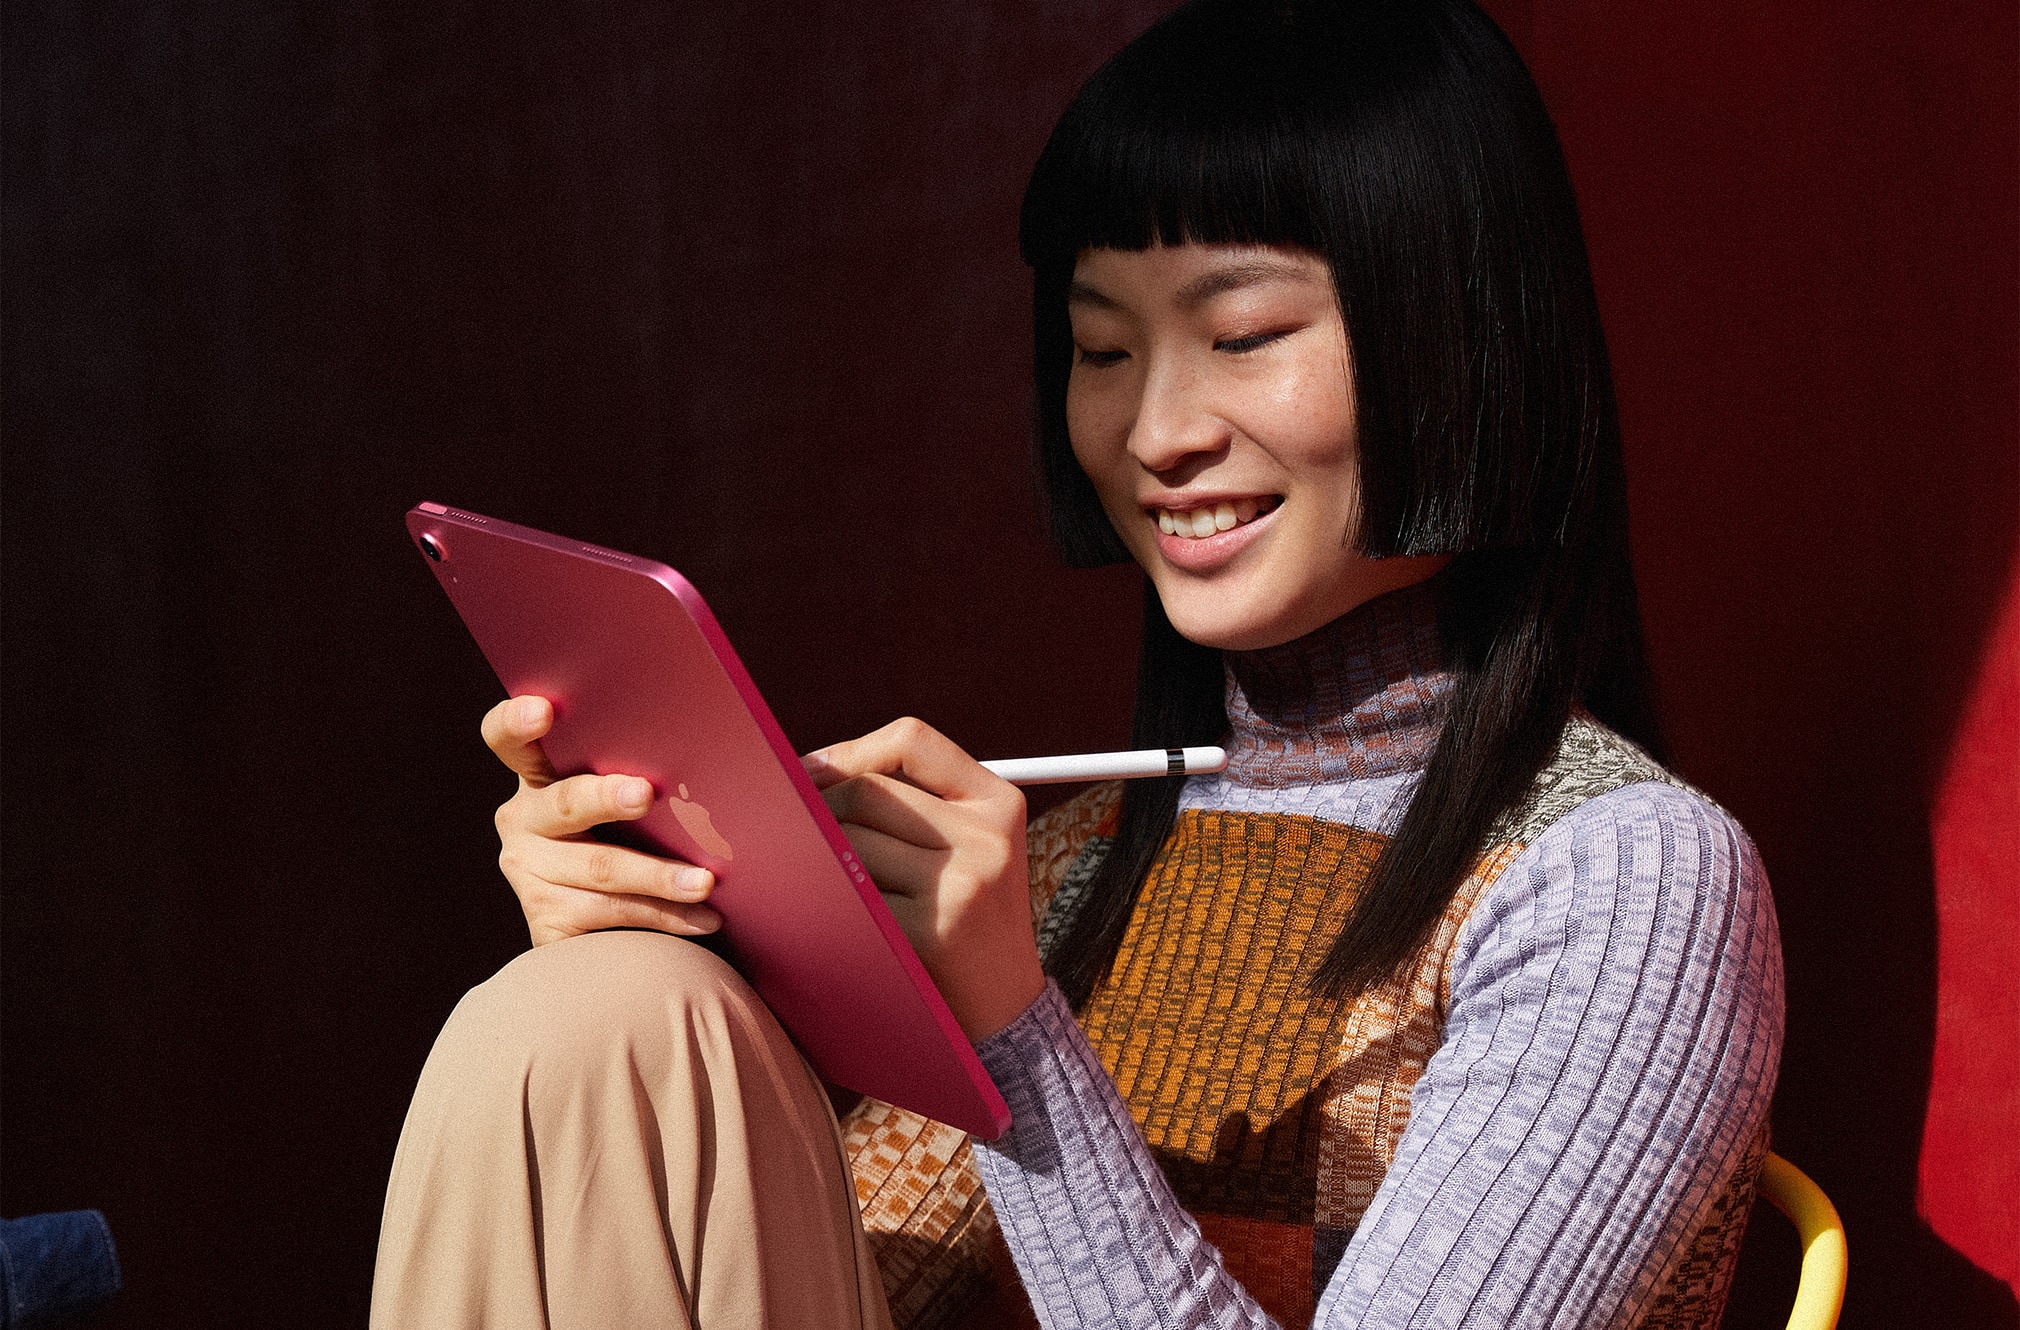 woman smiling while drawing on her tablet